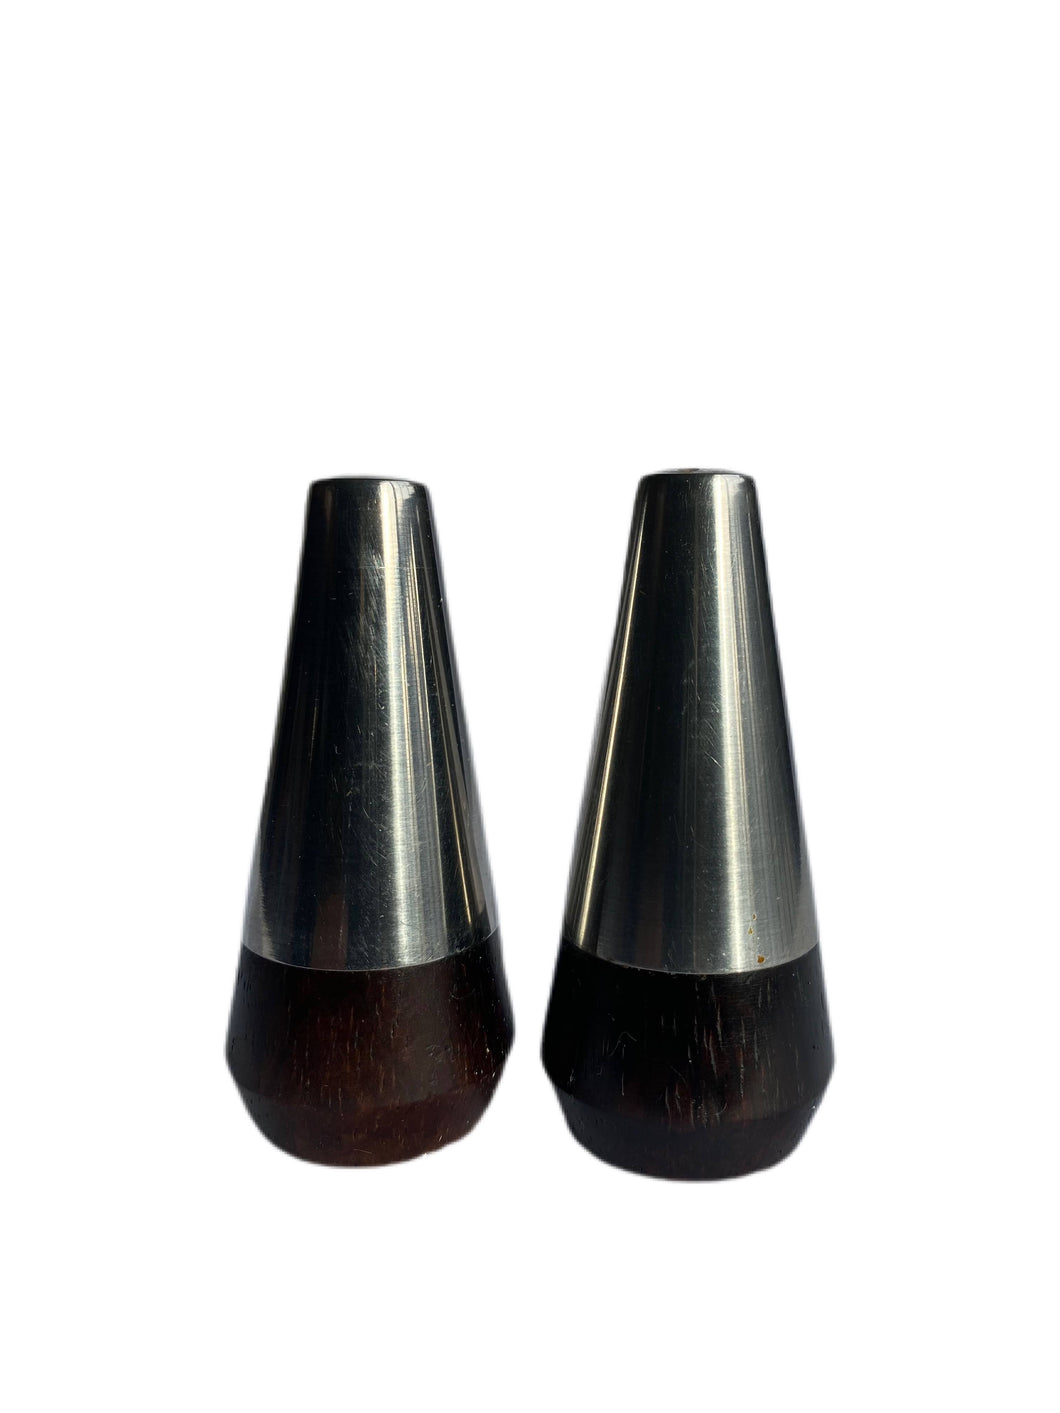 Pair of A&B (Lundtofte) Salt and Pepper Shakers